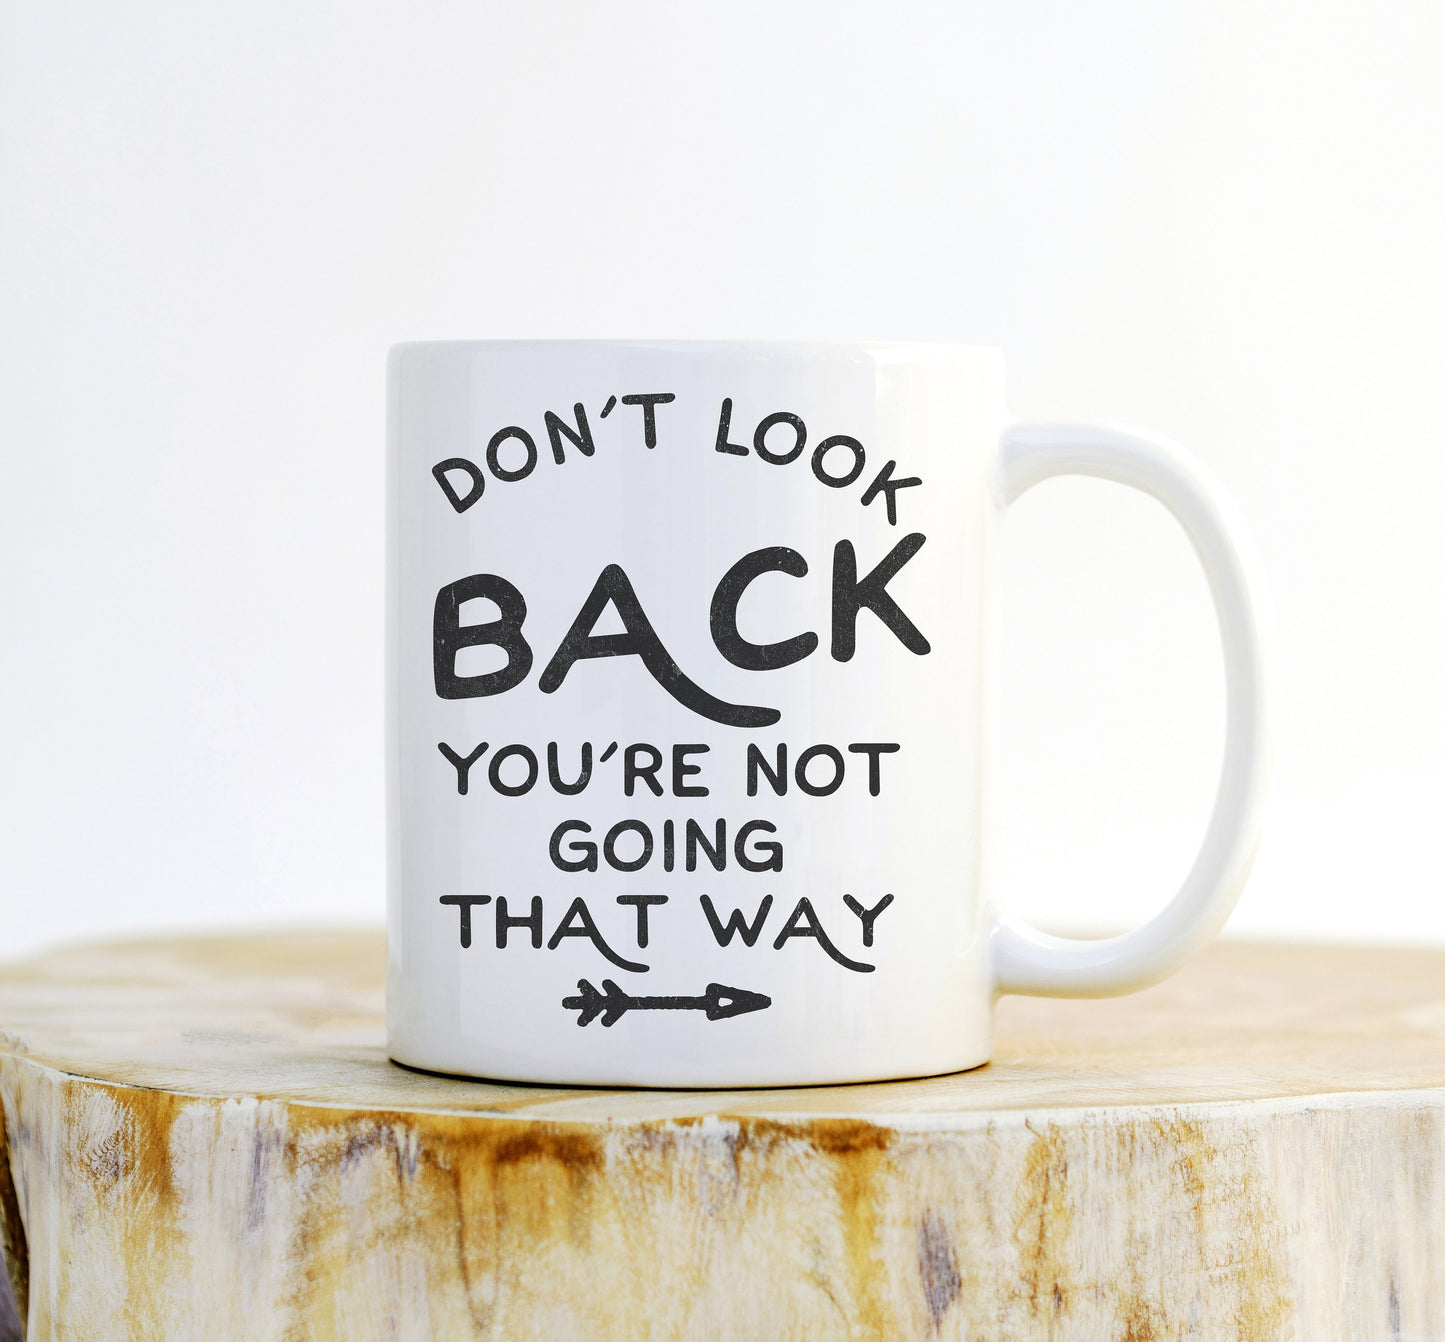 Don’t Look Back You’re Not Going That Way Mug - Mugs With Sayings, Inspirational Quote, Inspirational Gift, Mug Of Motivation, Motivation